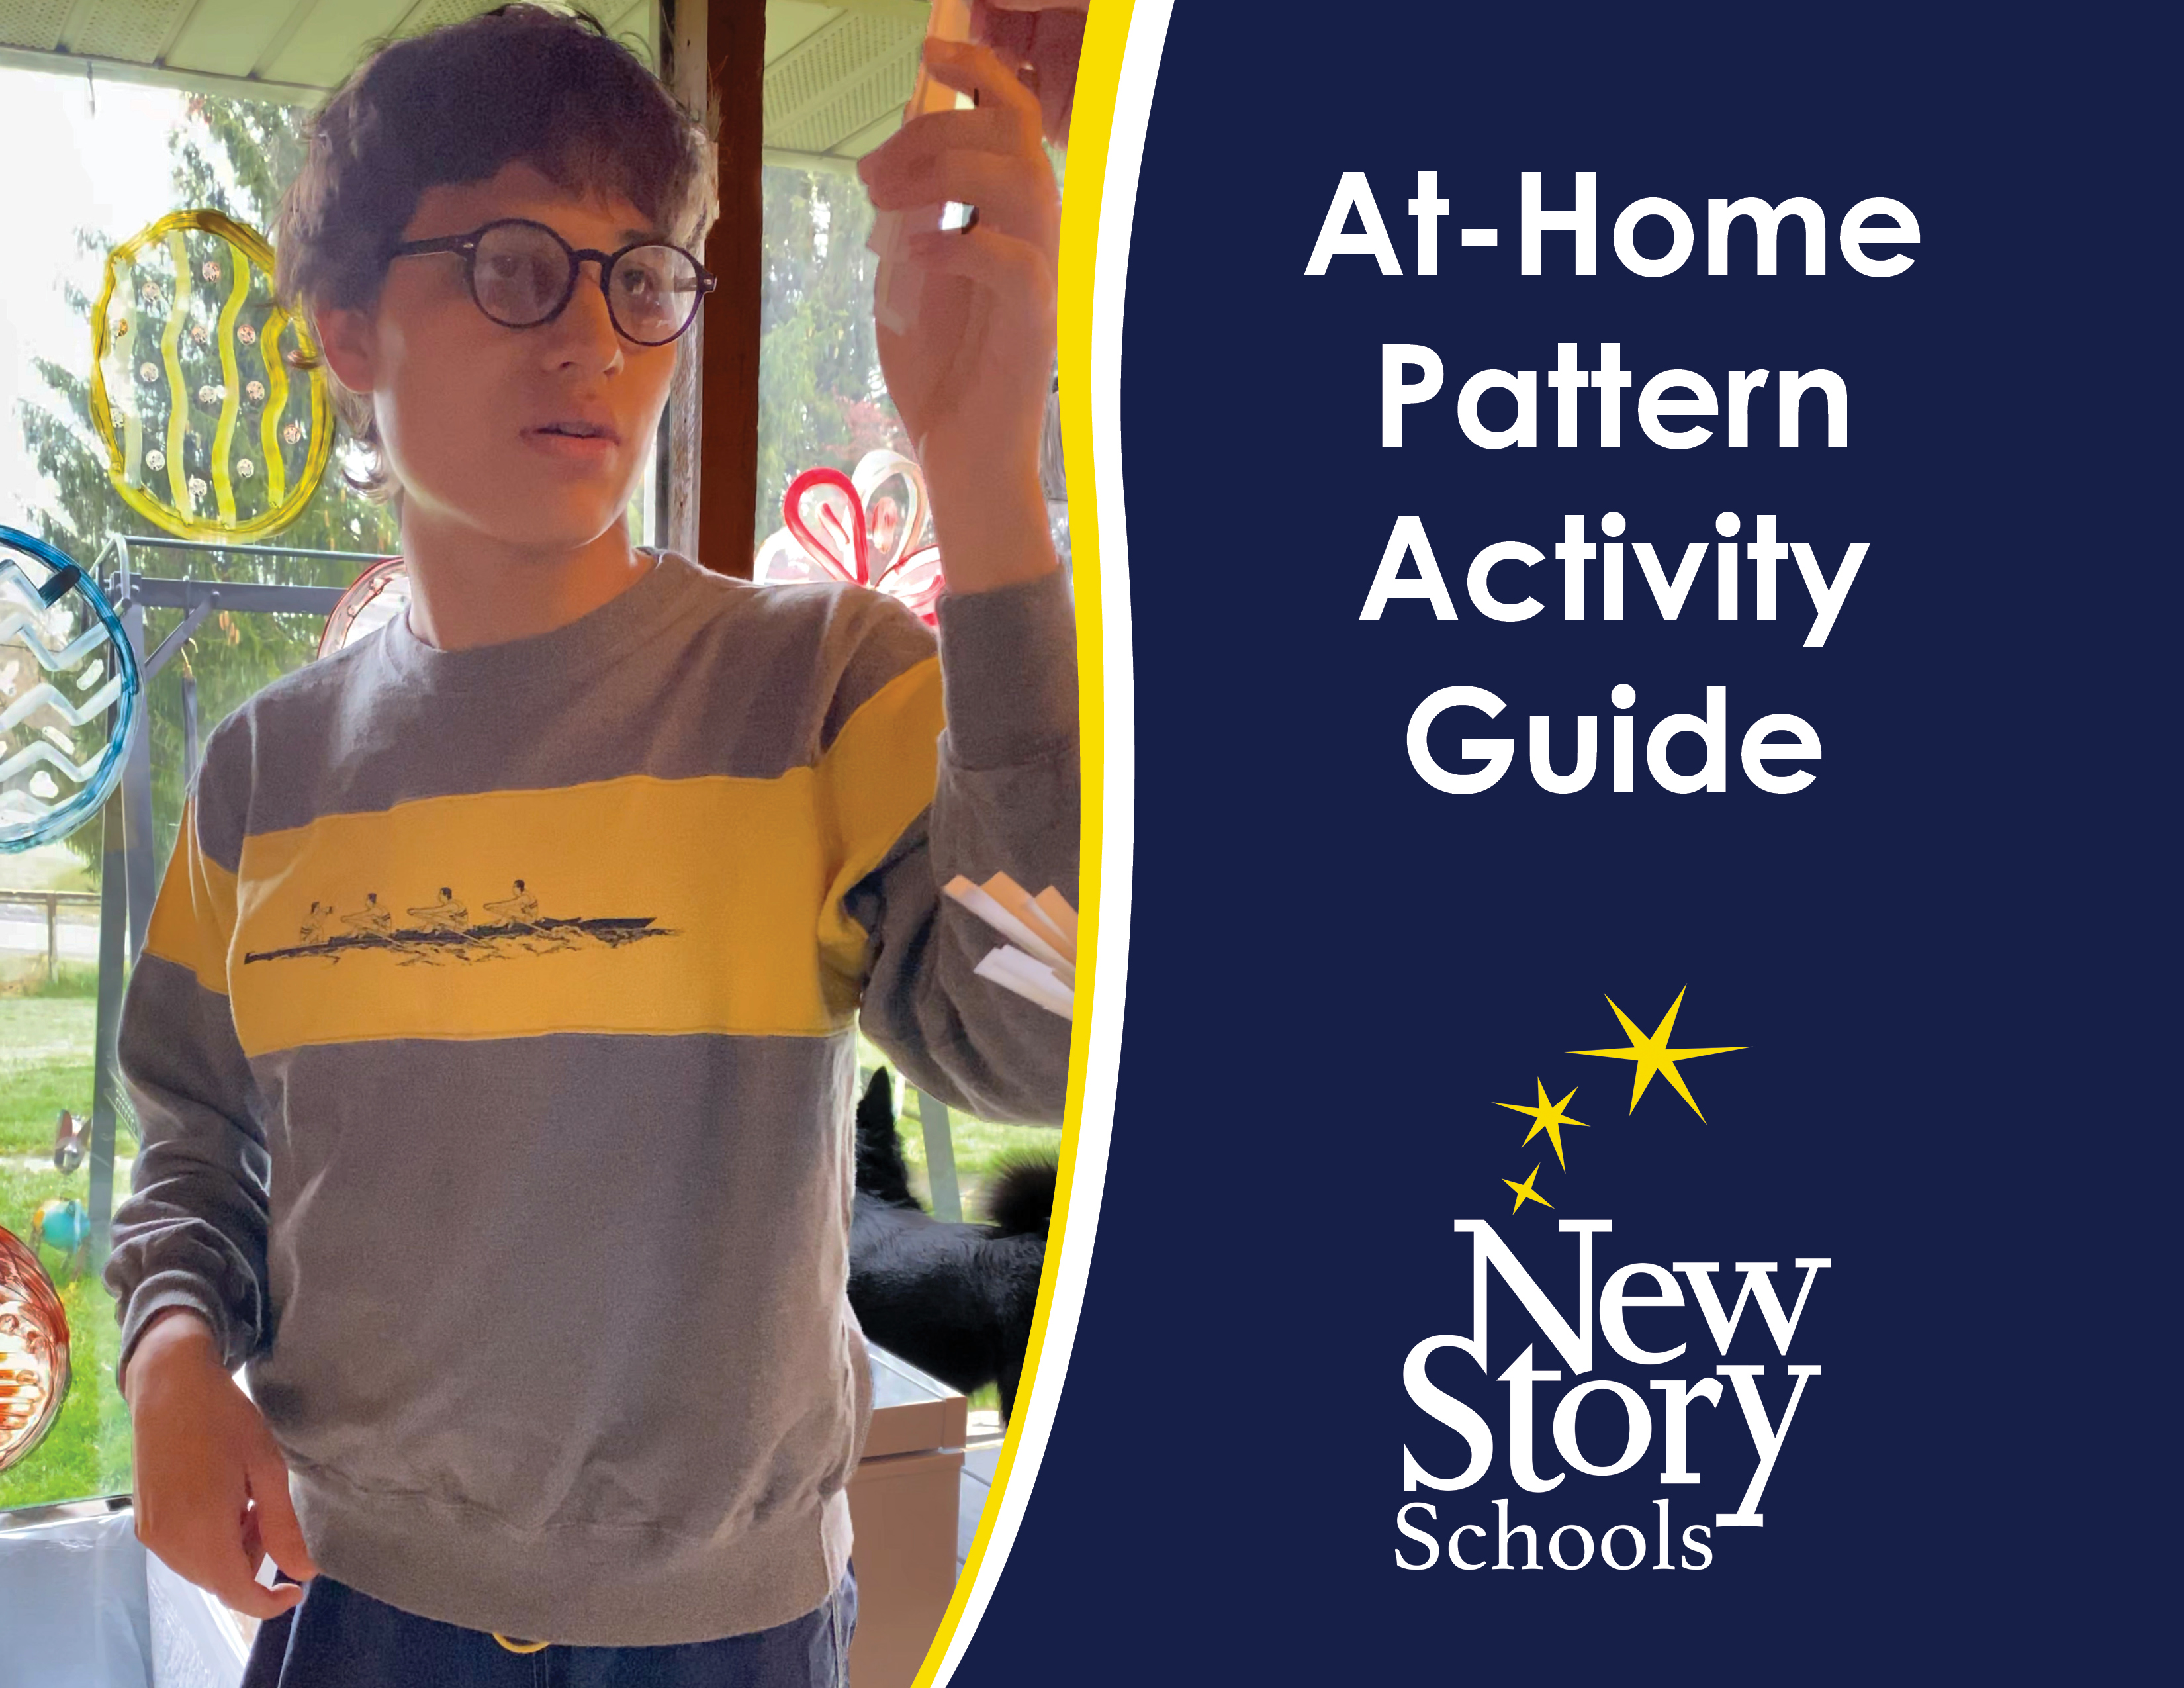 Student reaches for a piece of paper; Title: At-Home Pattern Activity Guide